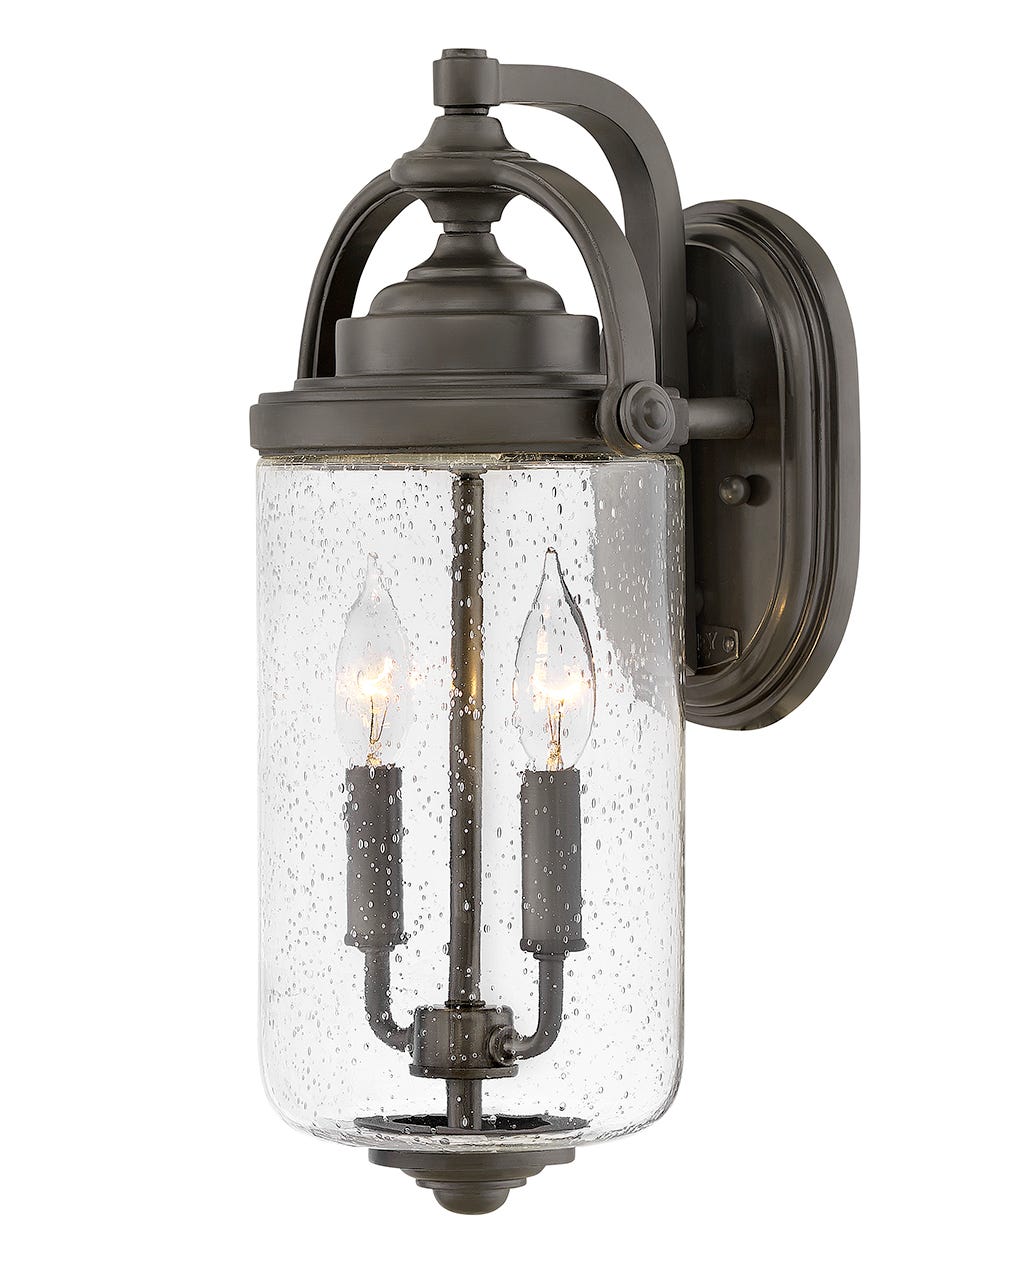 OUTDOOR WILLOUGHBY Wall Mount Lantern Outdoor l Wall Hinkley Oil Rubbed Bronze 8.5x8.25x17.0 